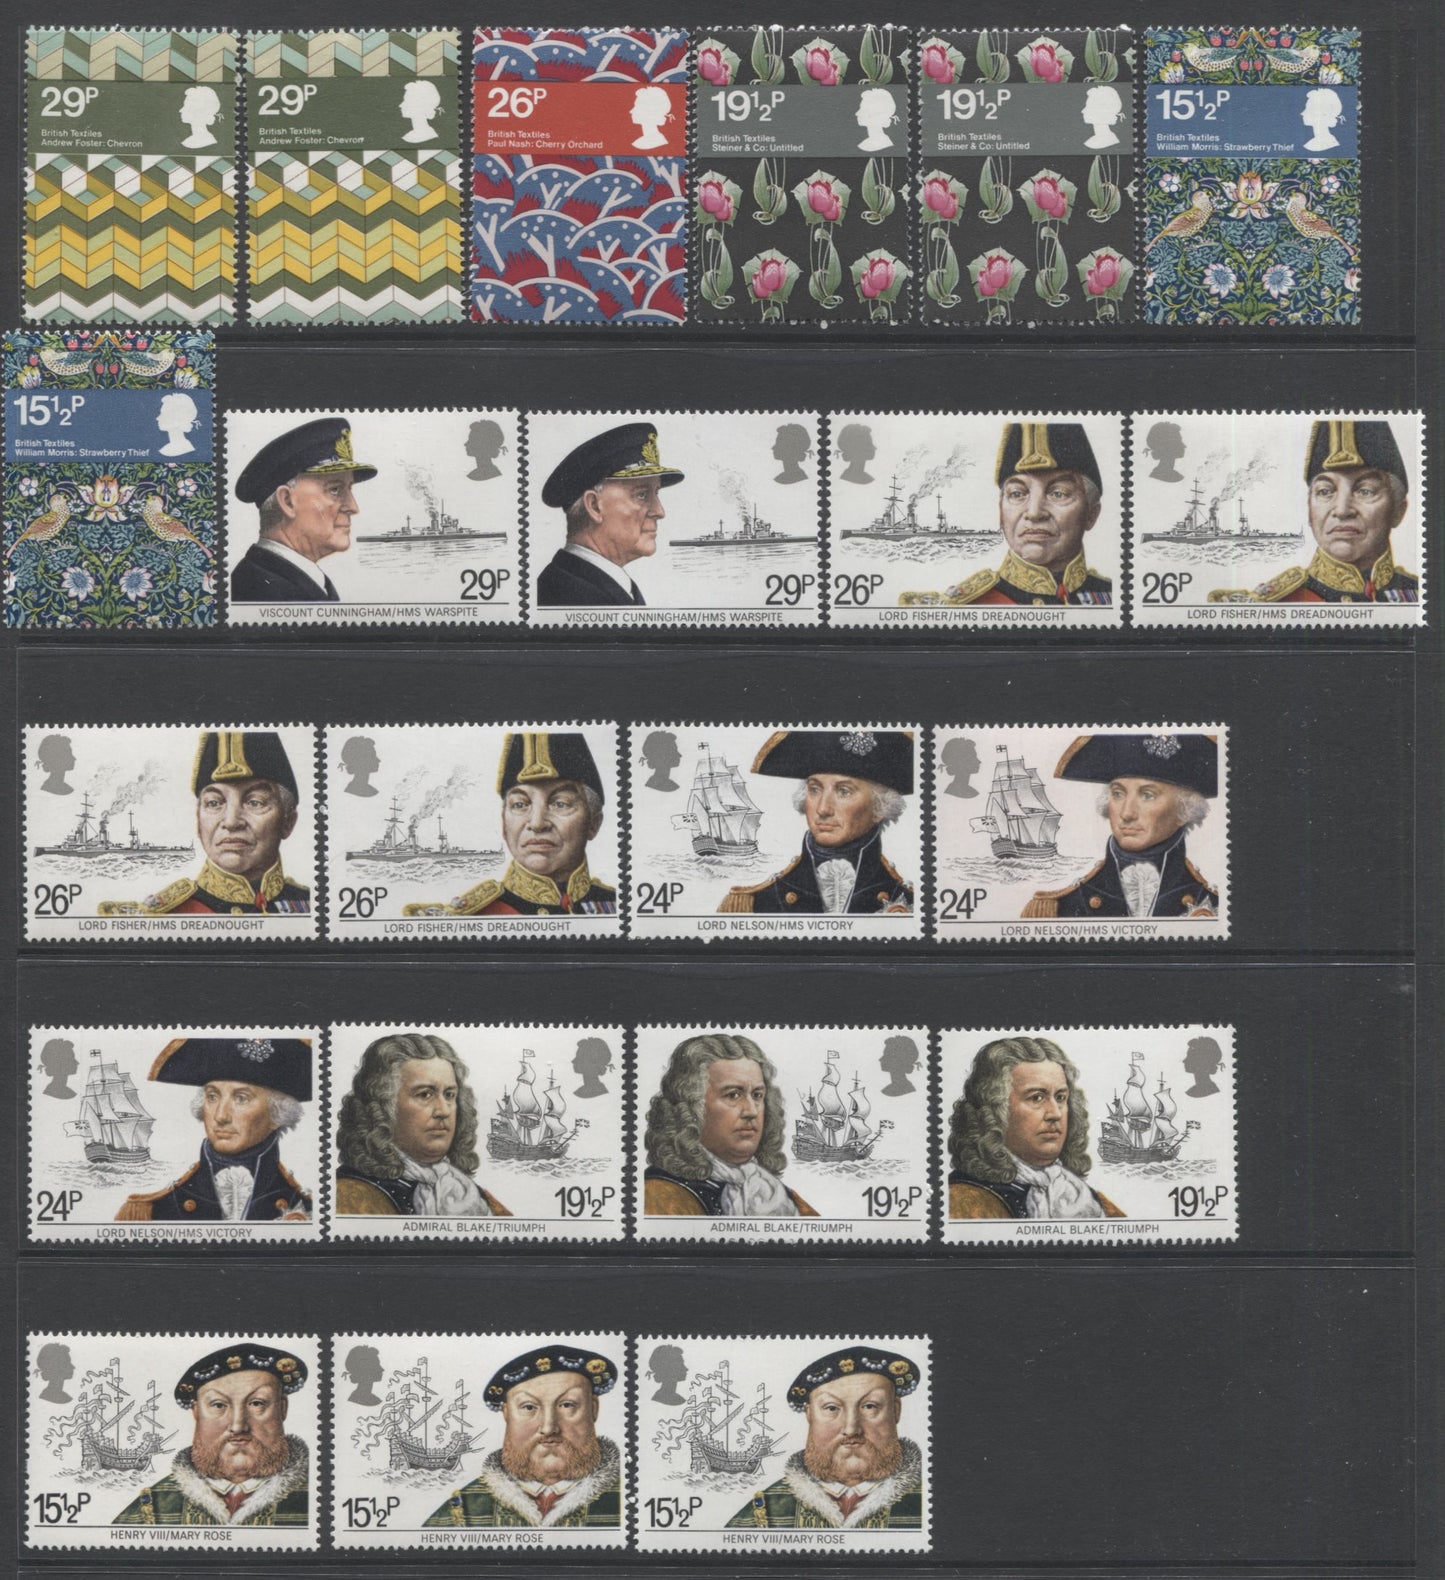 Lot 22 Great Britain SC#991-999, 1982 Admirals & Textiles Issues, A Specialized Lot Of 22 VFNH Singles On Varying Phosphorized Papers. 2006 Scott Cat $18.85 USD, Click on Listing to See ALL Pictures